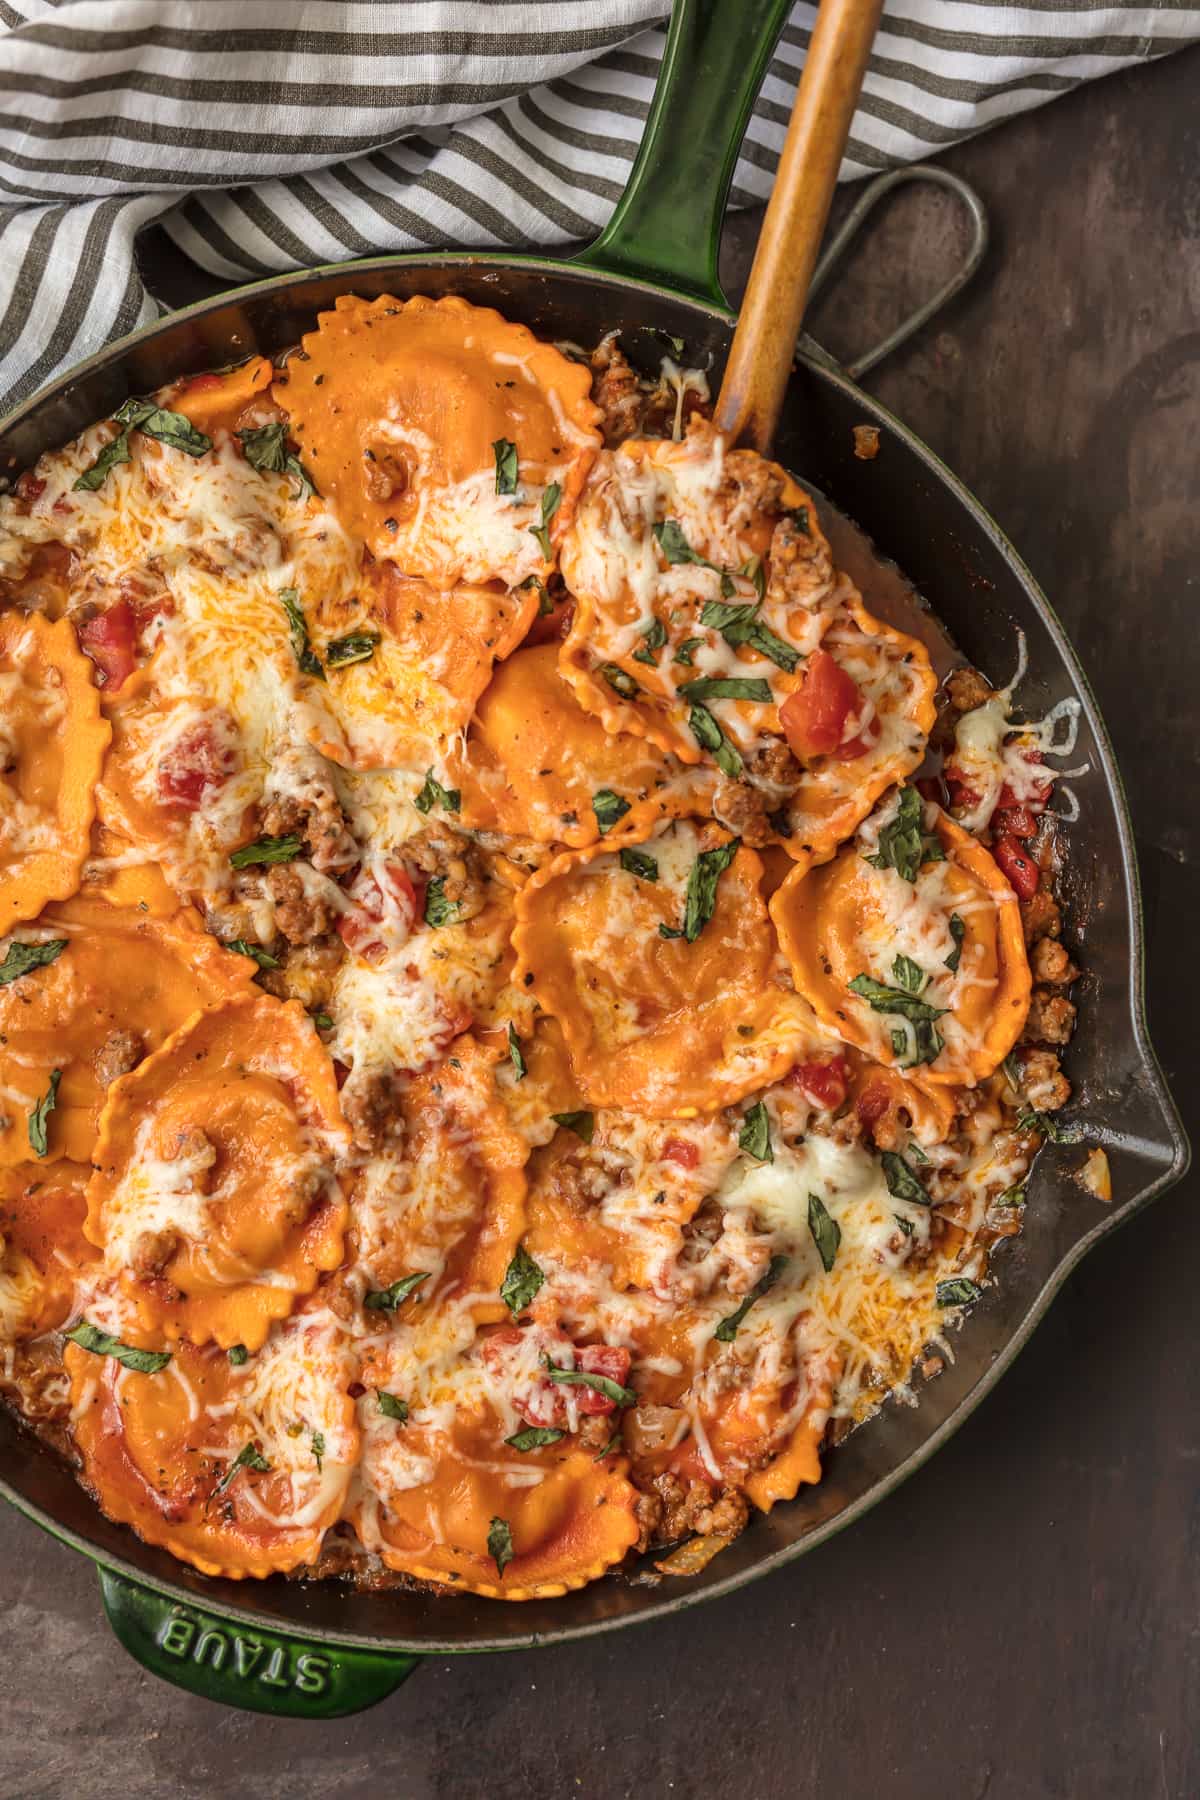 skillet filled with ravioli and Italian sausage